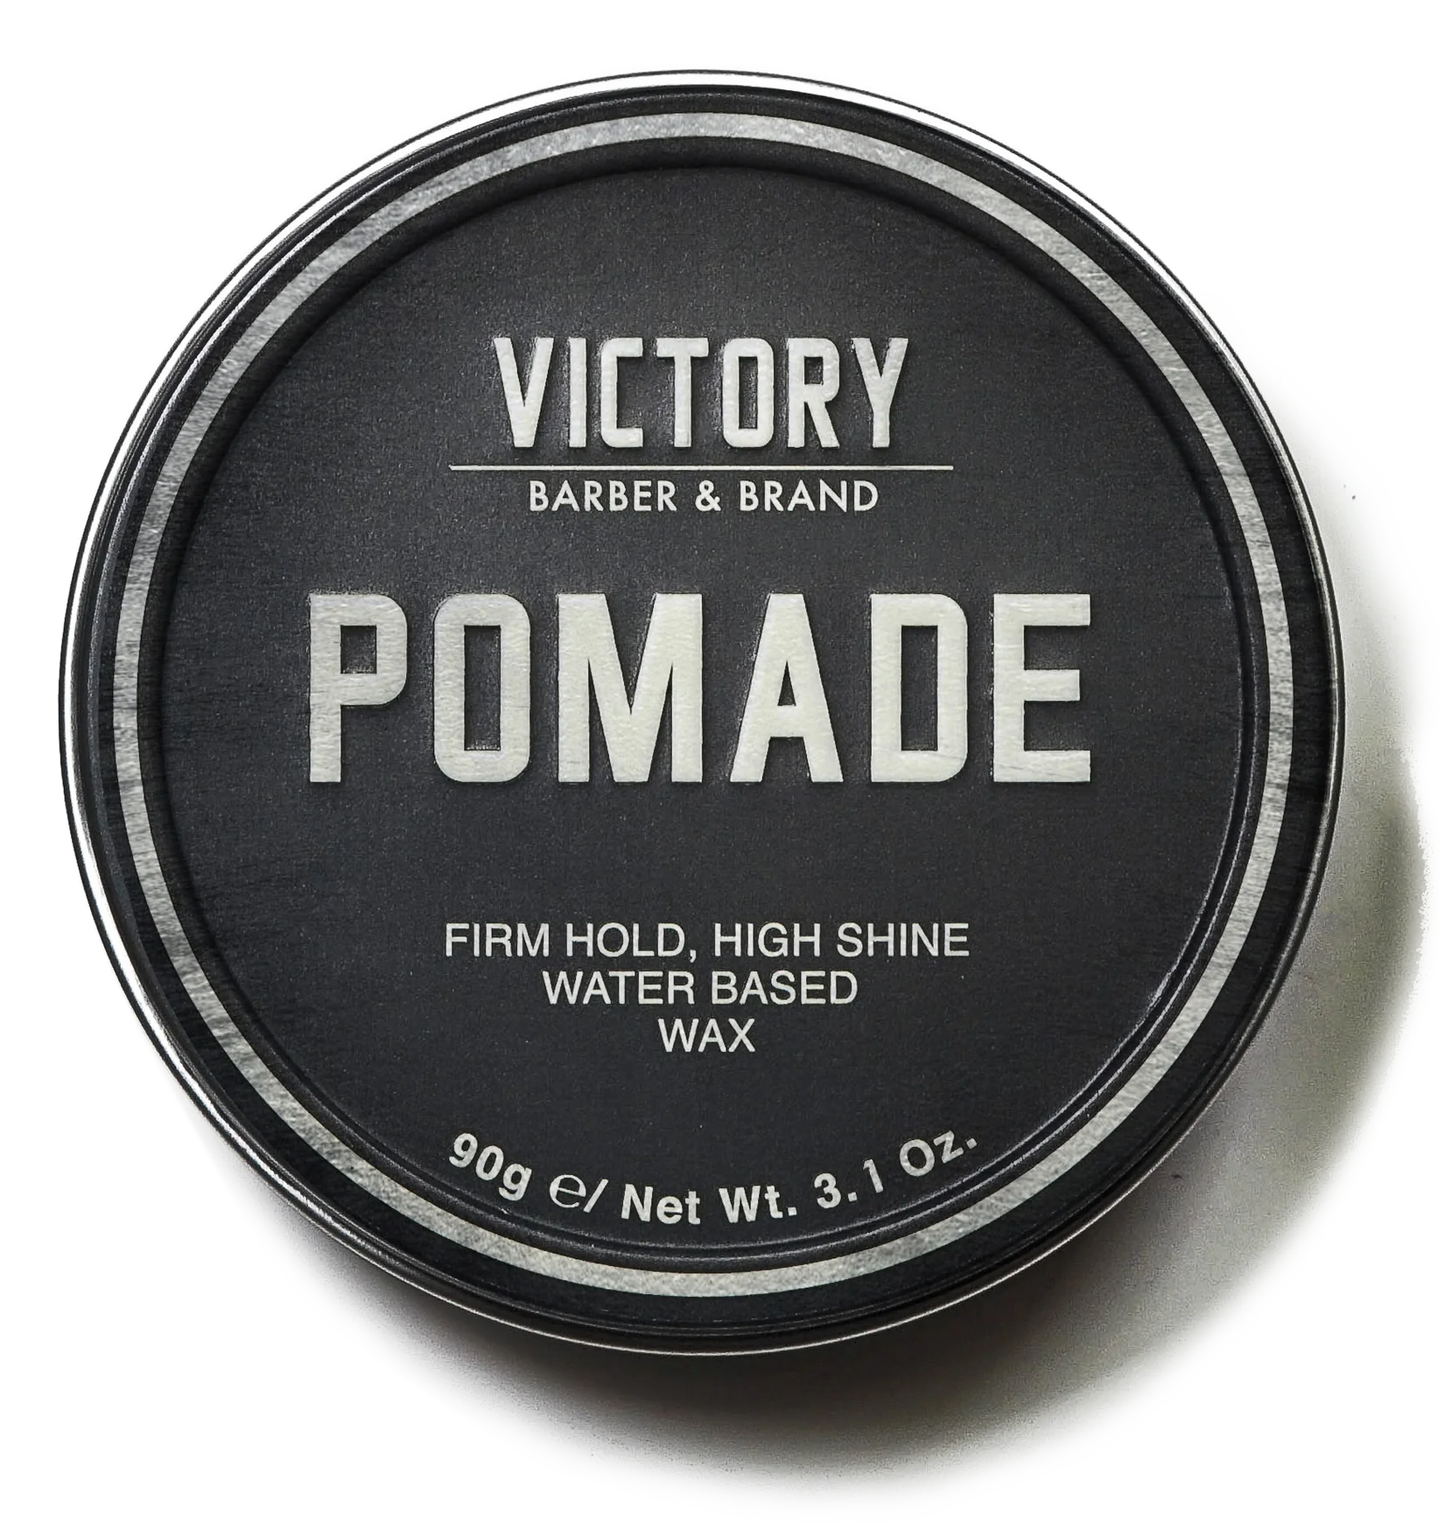 Victory Pomade Firm hold, high shine water-based wax